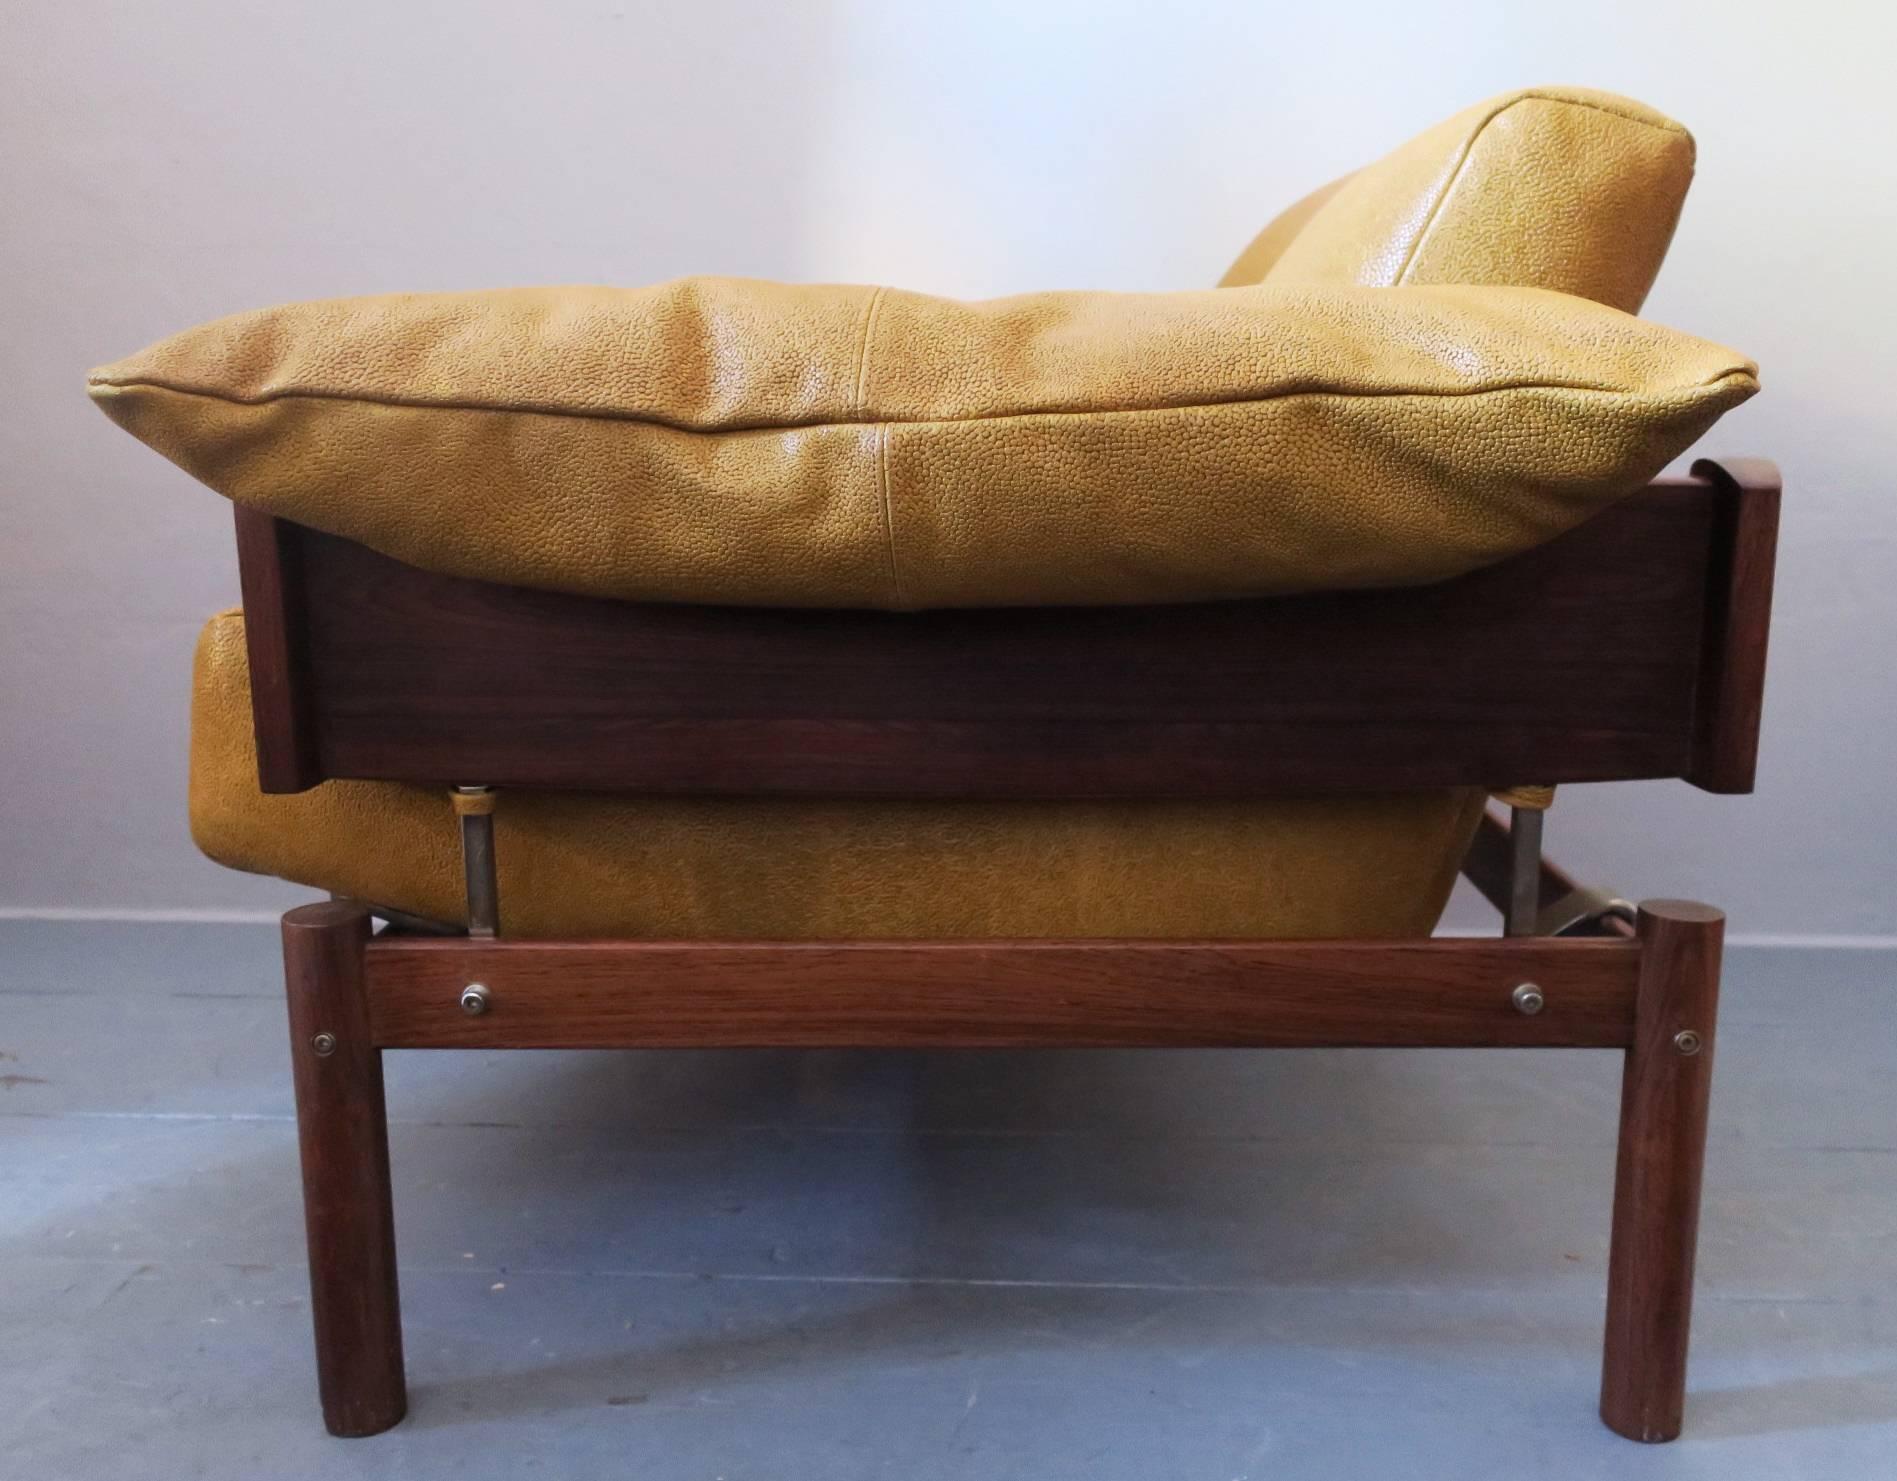 Brazilian lounge chair by Percival Lafer in rosewood, 1960s.

The chair has been recently re-upholstered with well-matched textured leather in muted yellow.